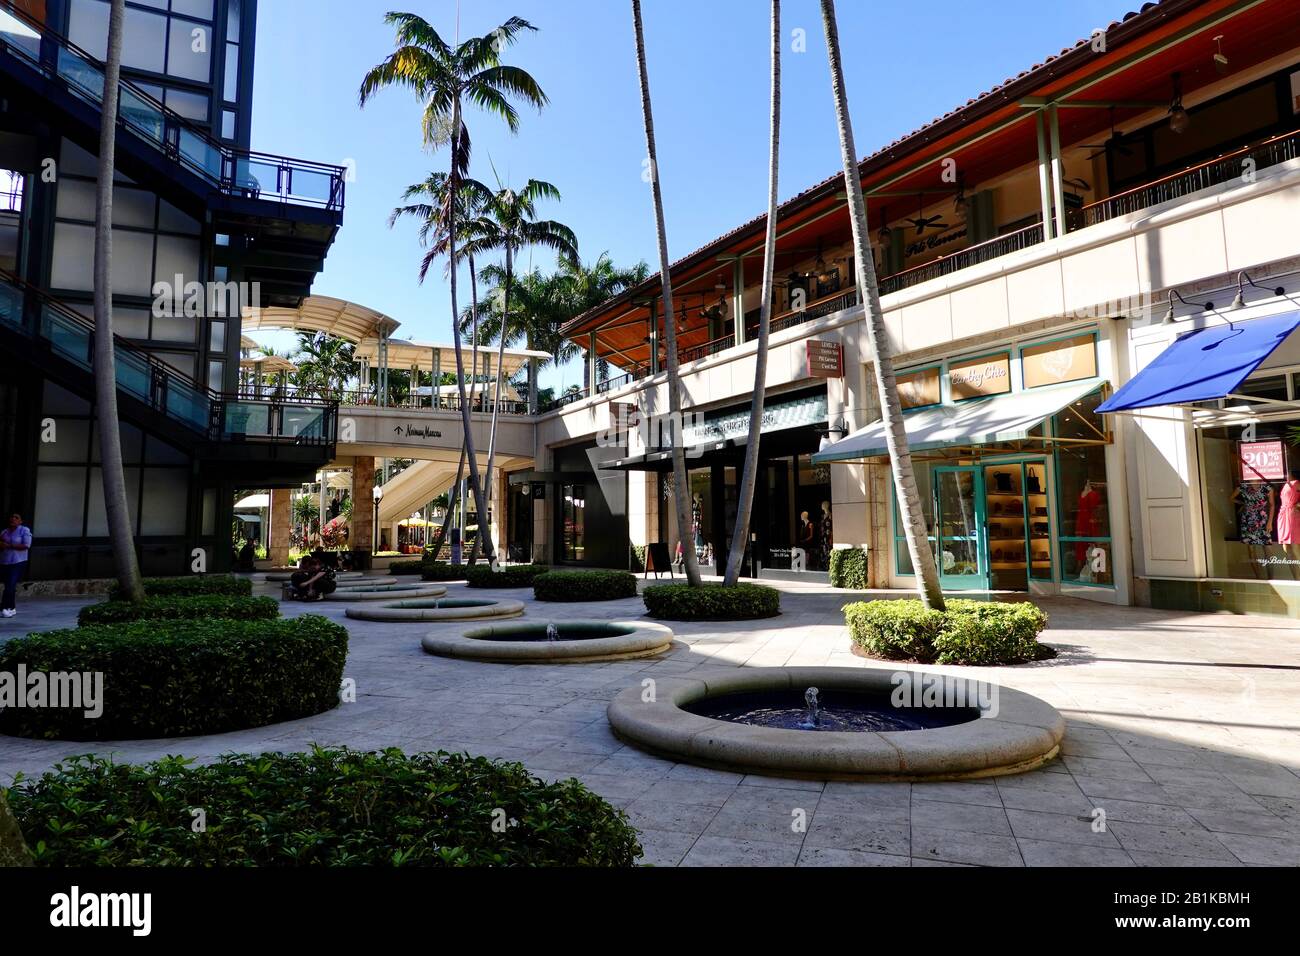 A few people in a paved, courtyard area of the Shops at Merrick Park, an upscale outdoor mall in Coral Gables, Miami, Florida, USA. Stock Photo